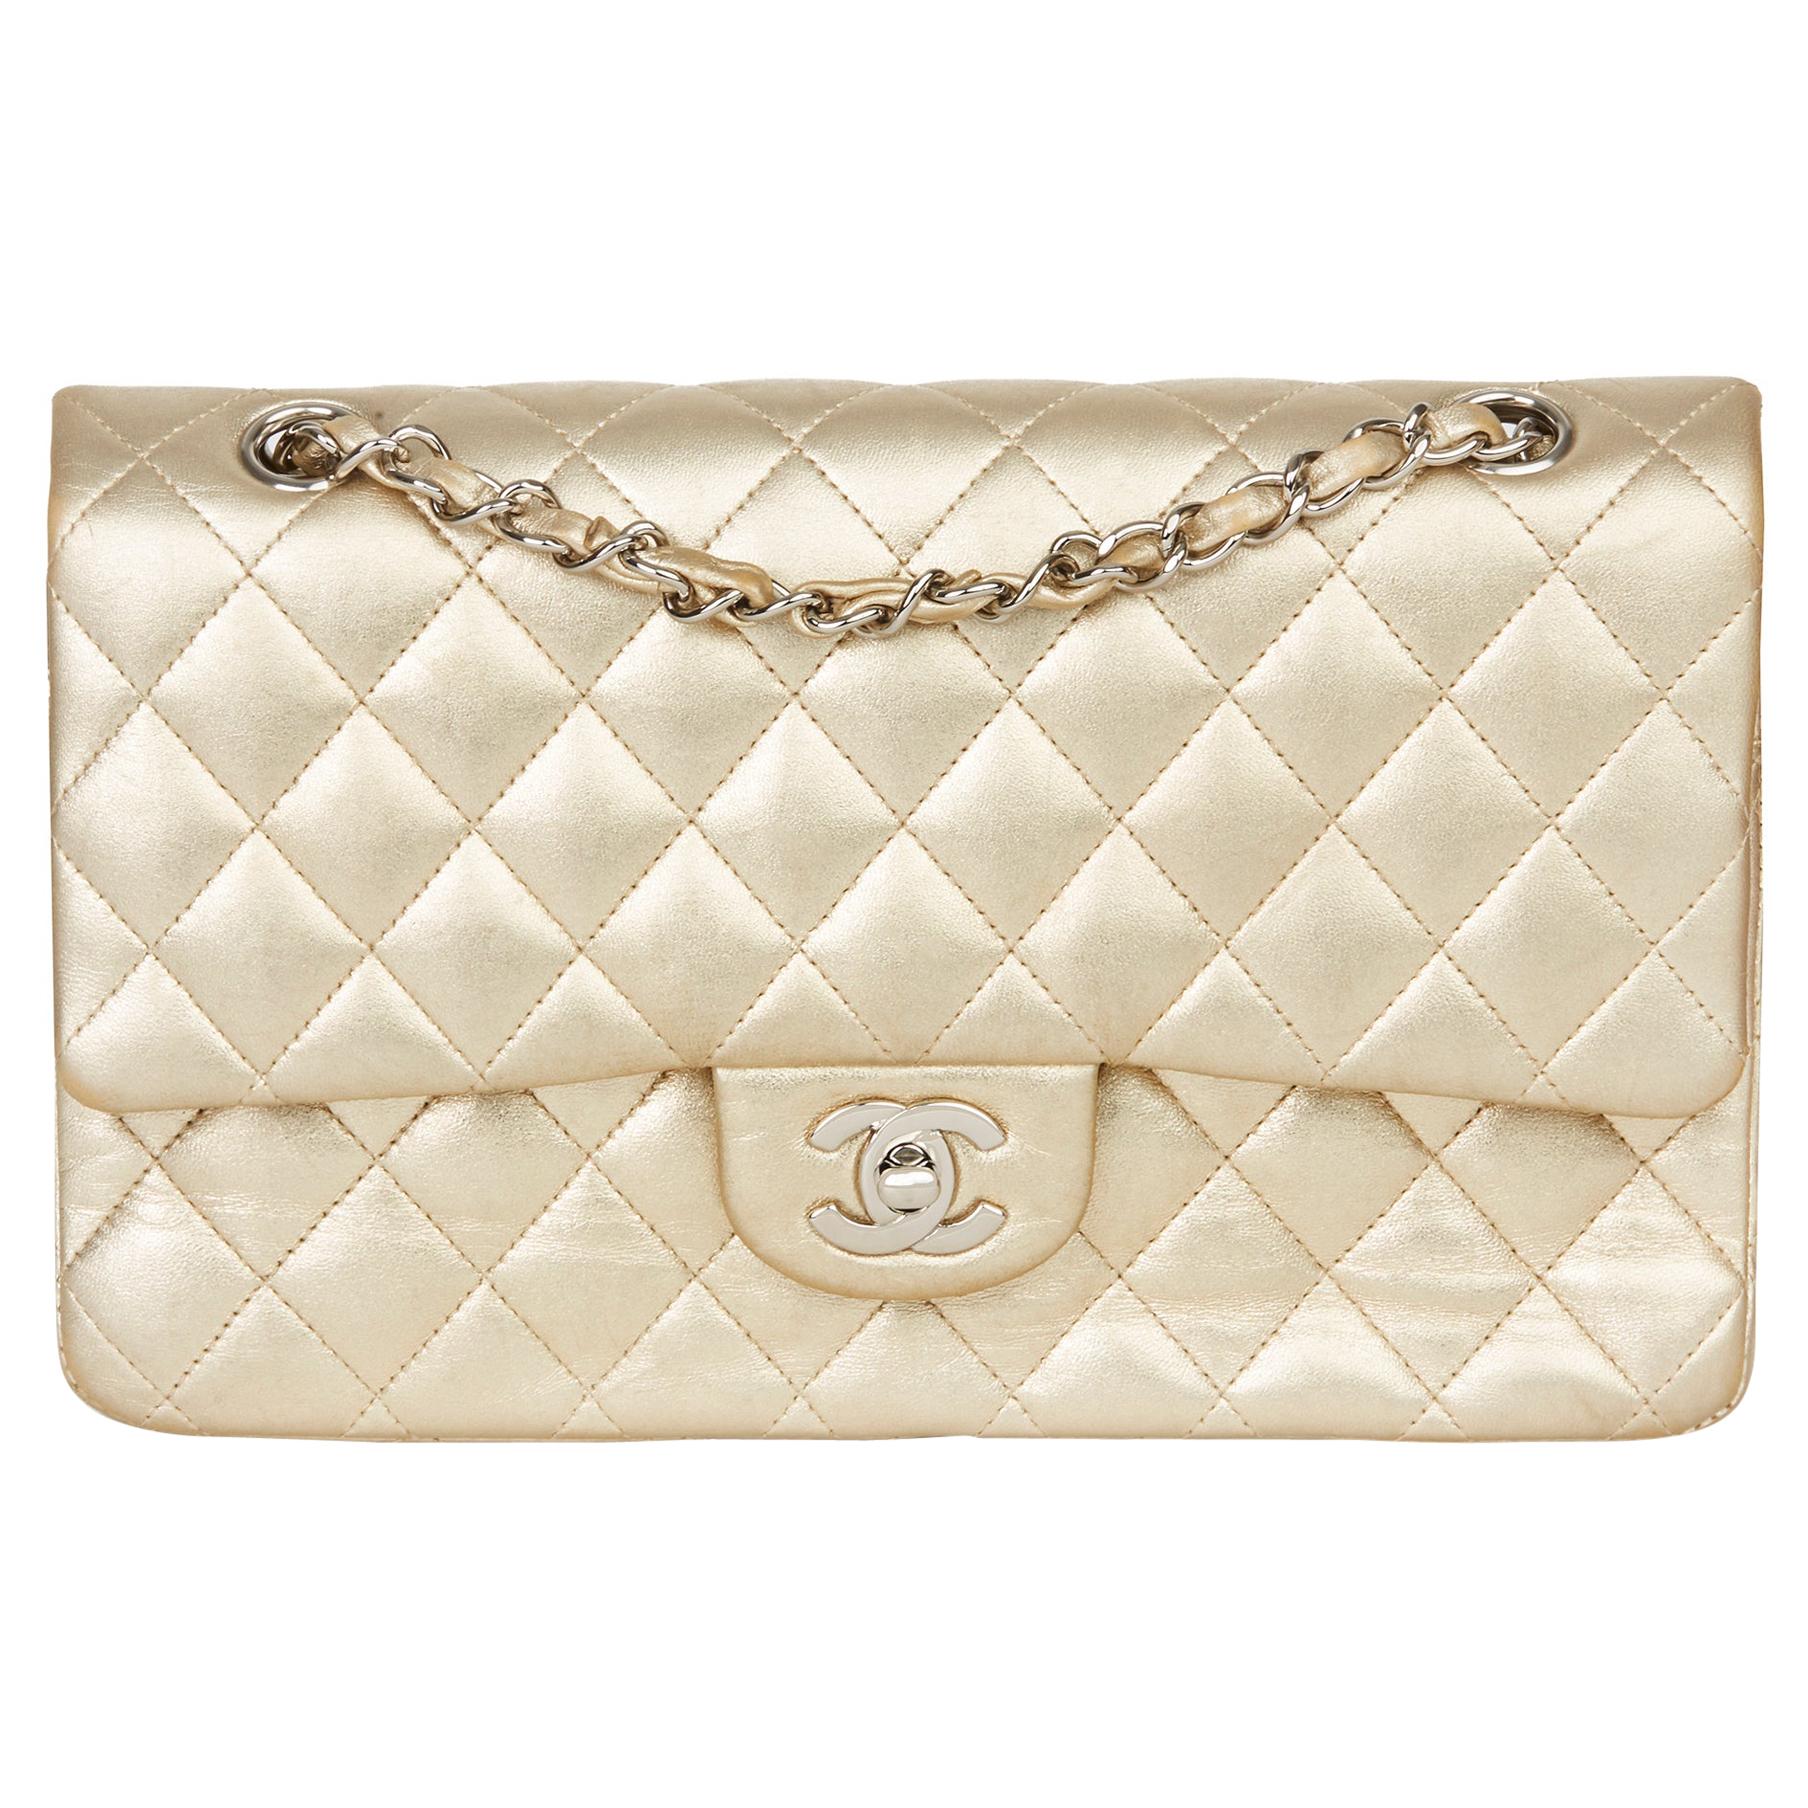 2007 Chanel Gold Quilted Metallic Lambskin Medium Classic Double Flap Bag